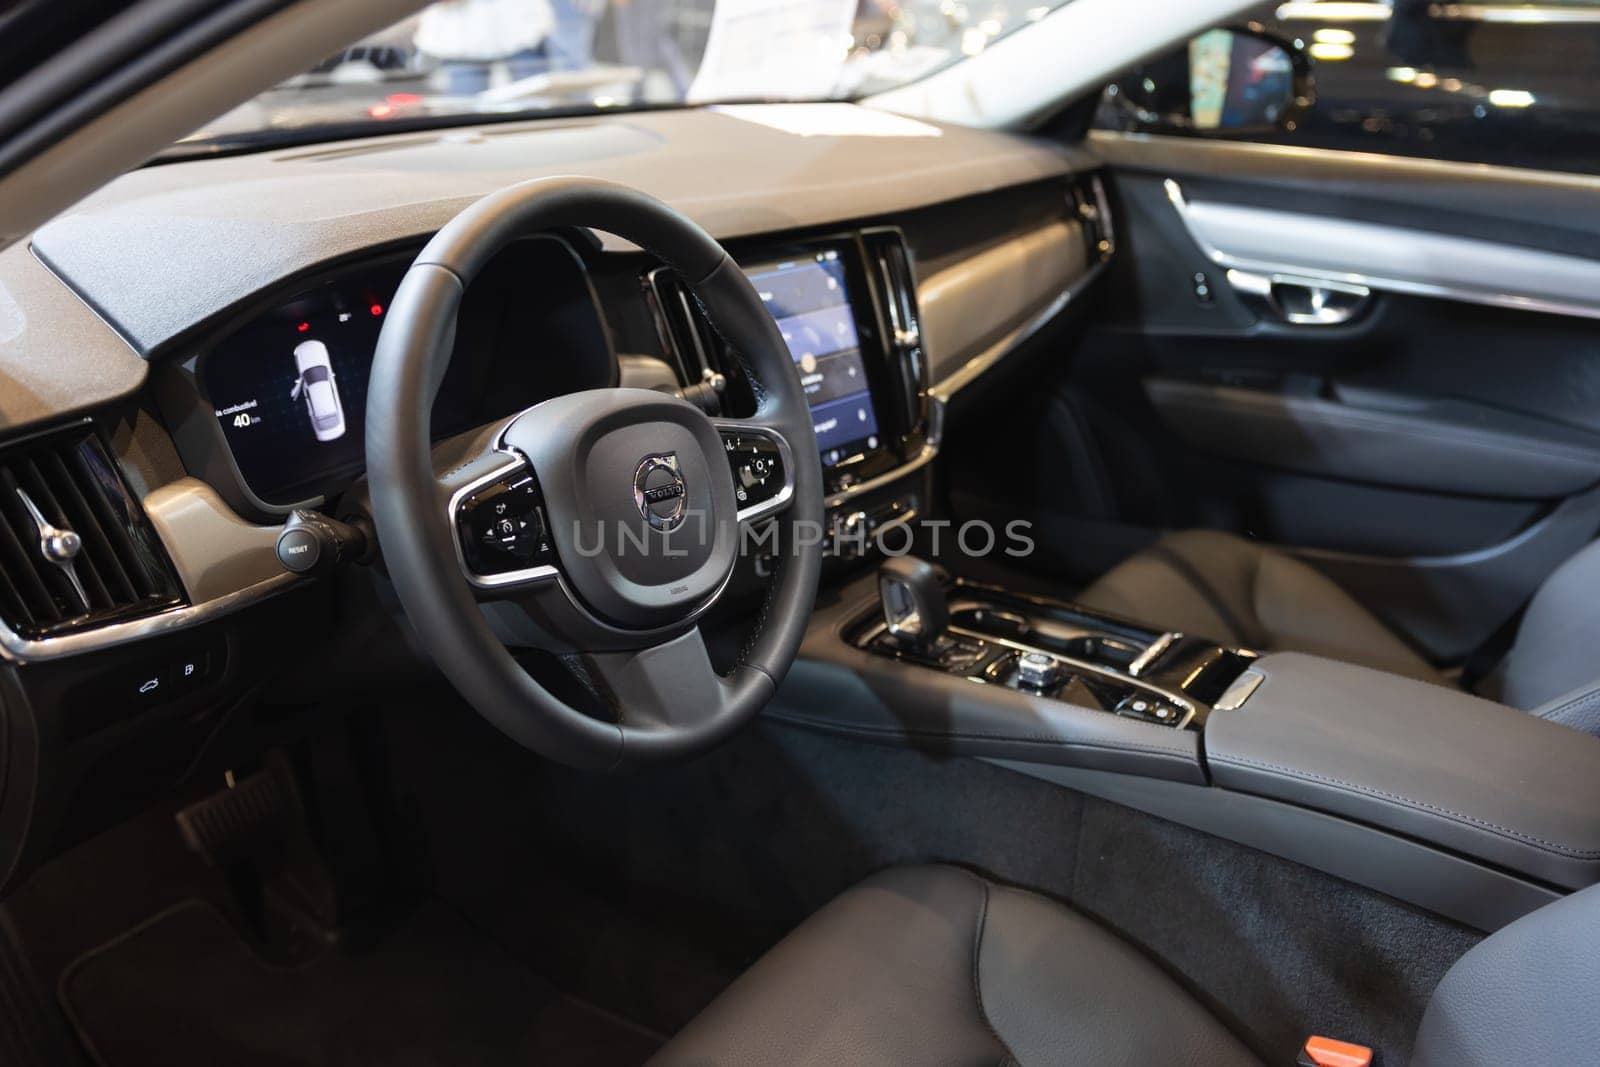 12 MAY 2023, Lisbon, Porugal, Electric car Show in International Fairy of Lisbon - The inside of a car with a steering wheel and dashboard